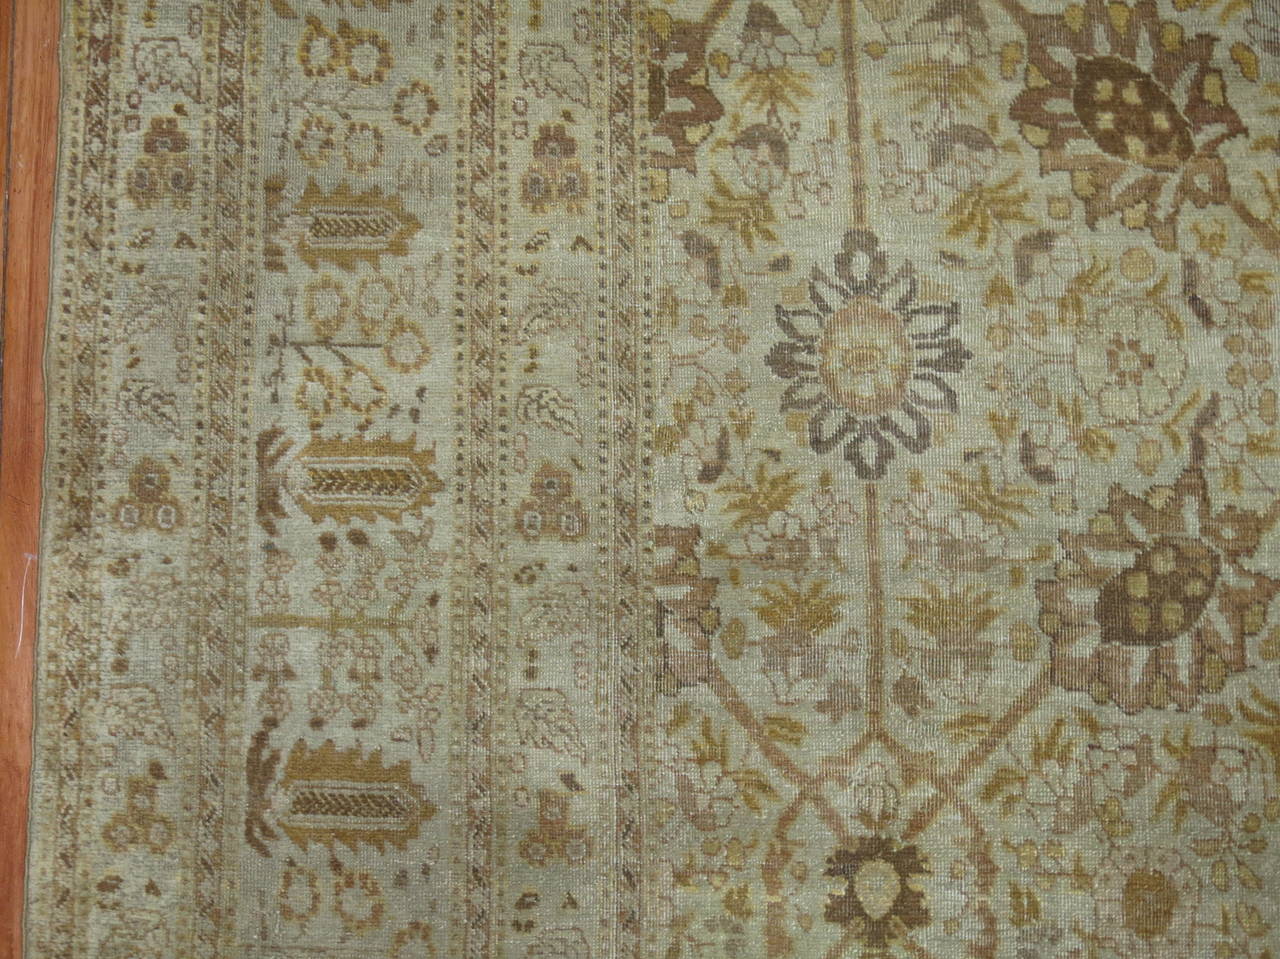 An early 20th century Persian Tabriz with an all-over design. Beige, brown, umber accents.

Measures: 9'3